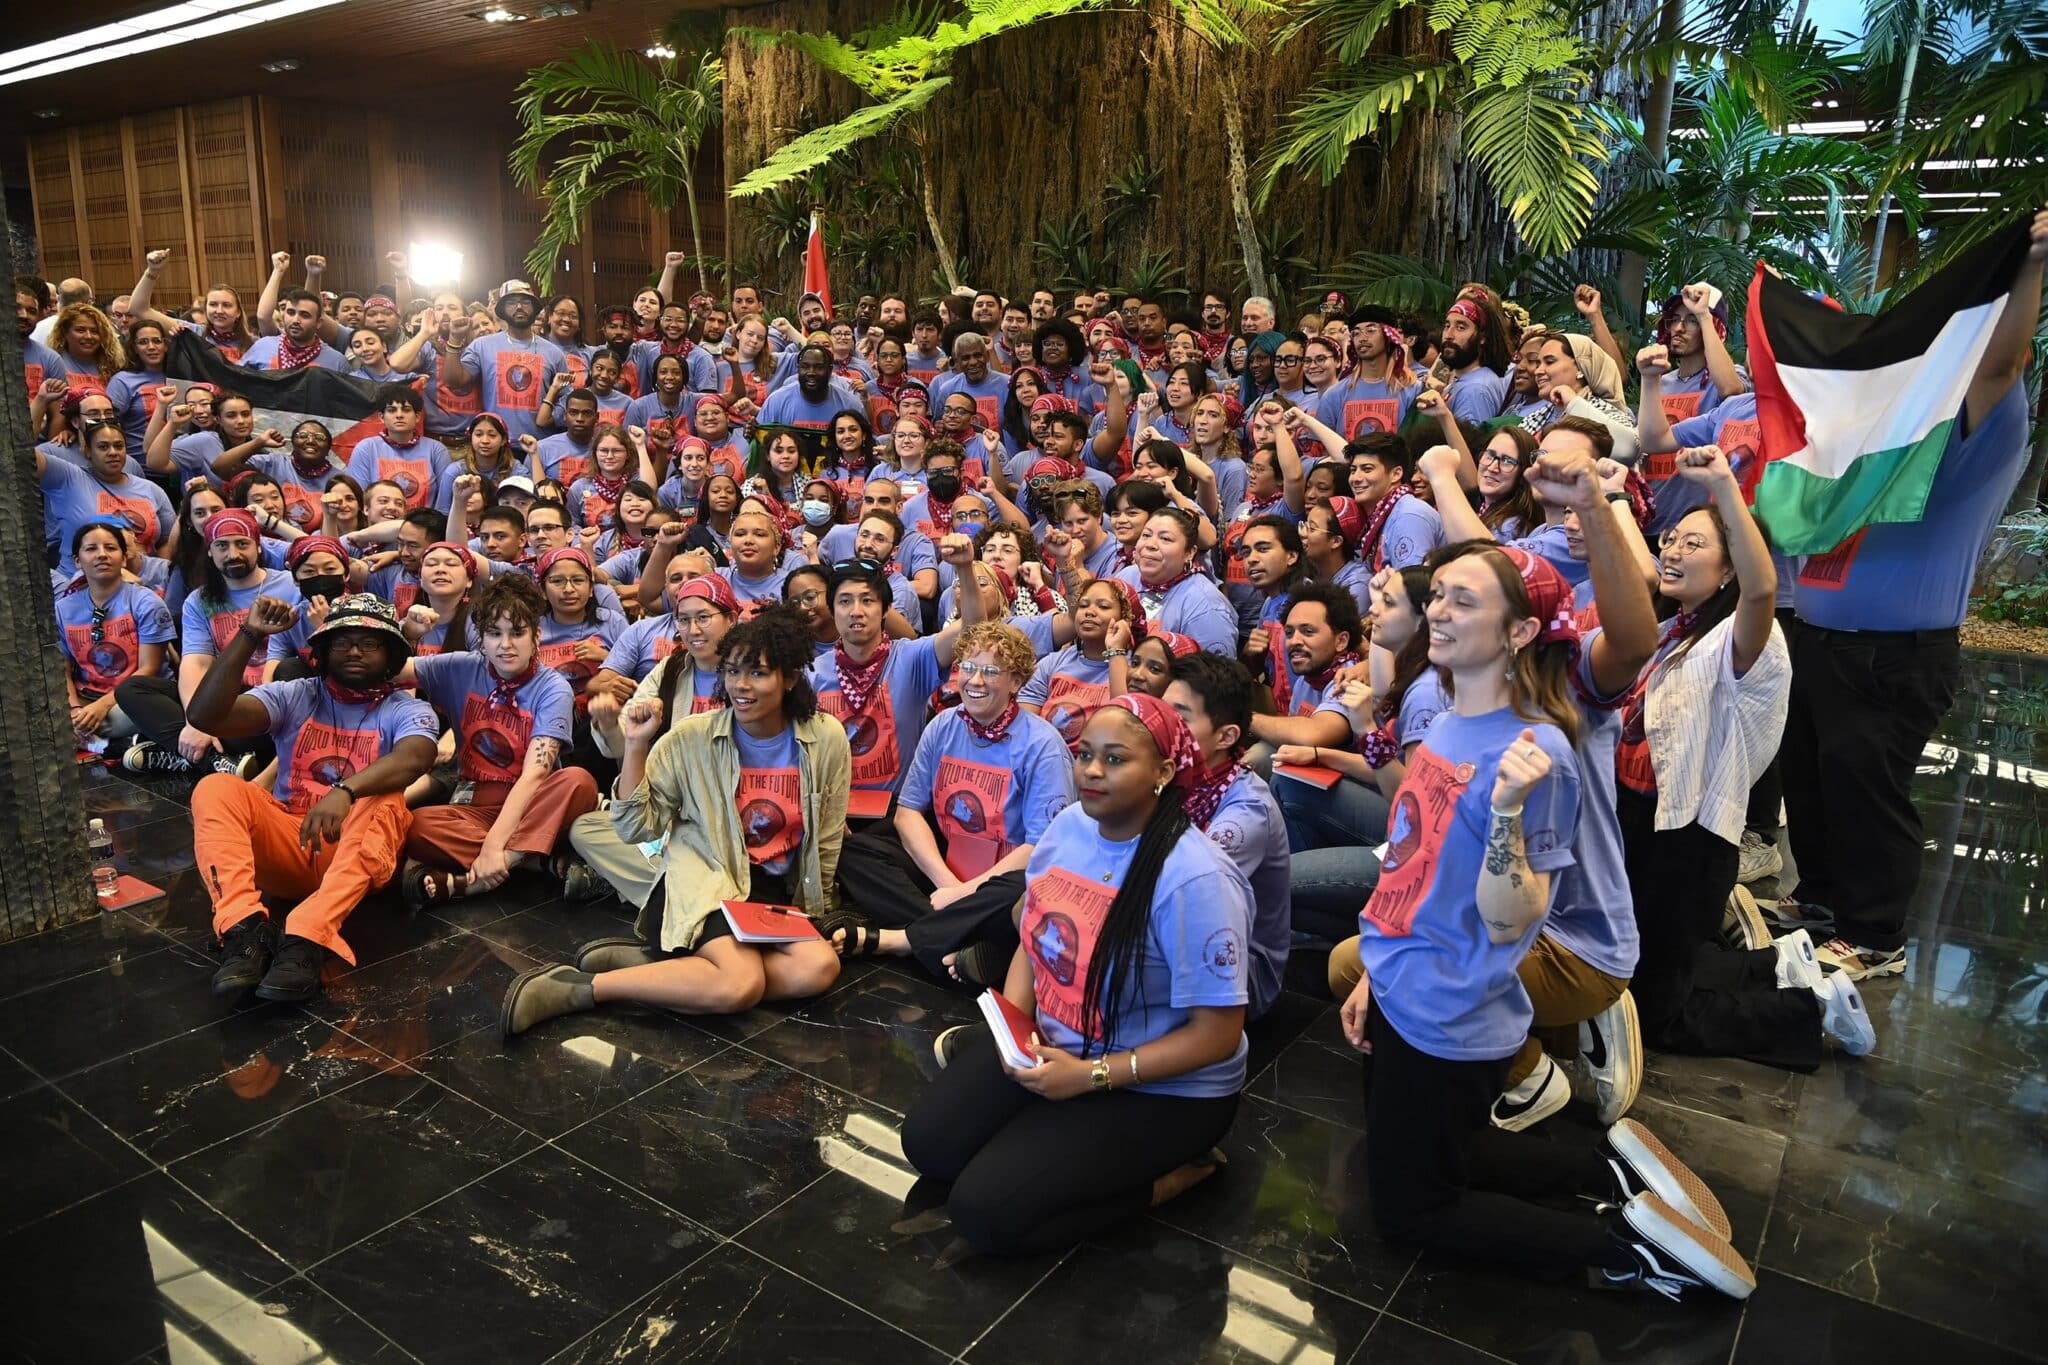 More than 300 US activists attended the International Solidarity for Cuba seminar at the Palace of the Revolution, in Cuba. Photo: Studies of the Revolution.